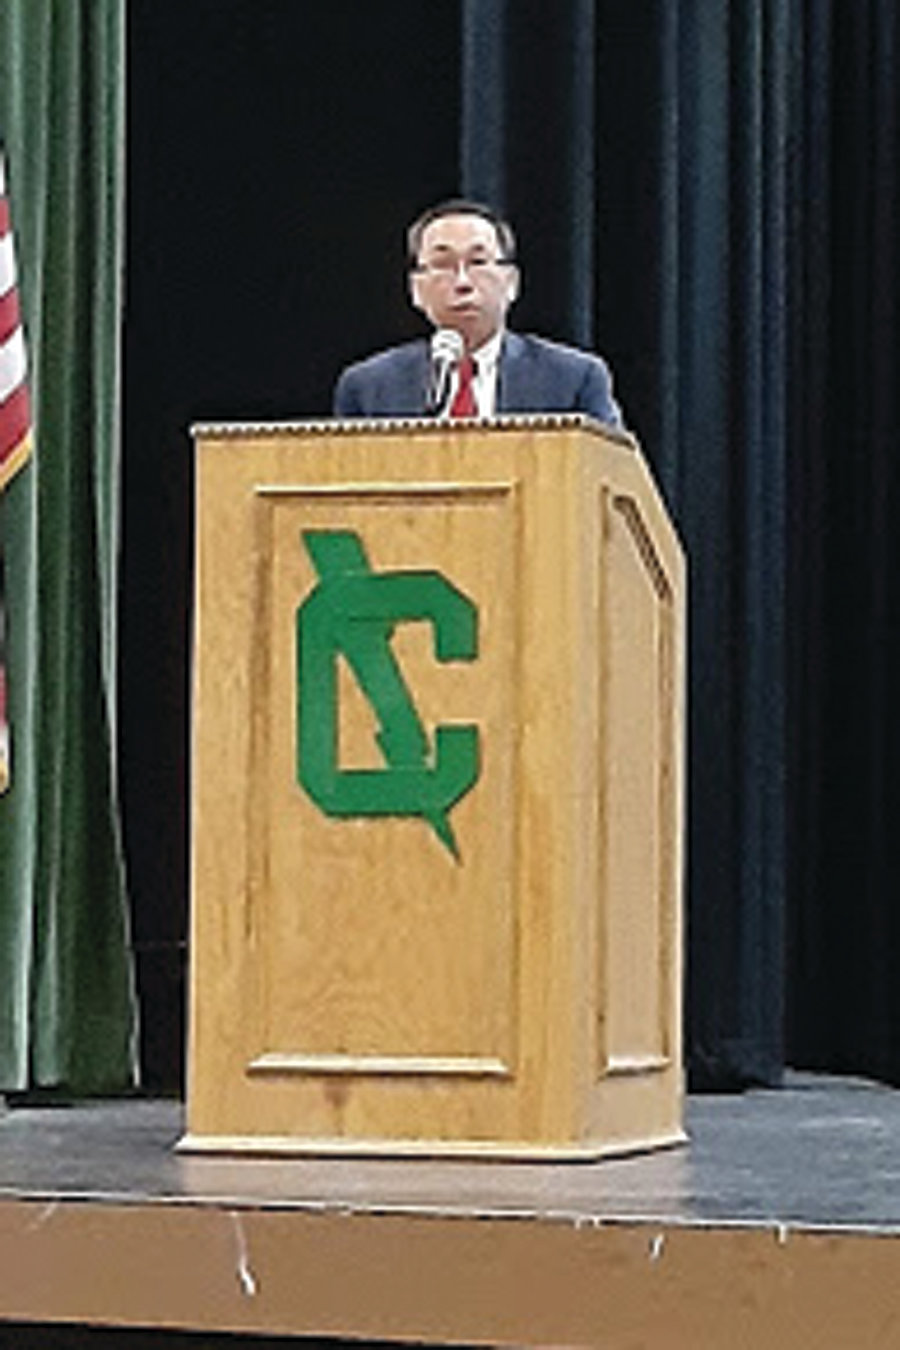 WELCOME TO CRANSTON: Mayor Allan Fung thanked Herren for sharing his story with the packed audience at Cranston High School East.